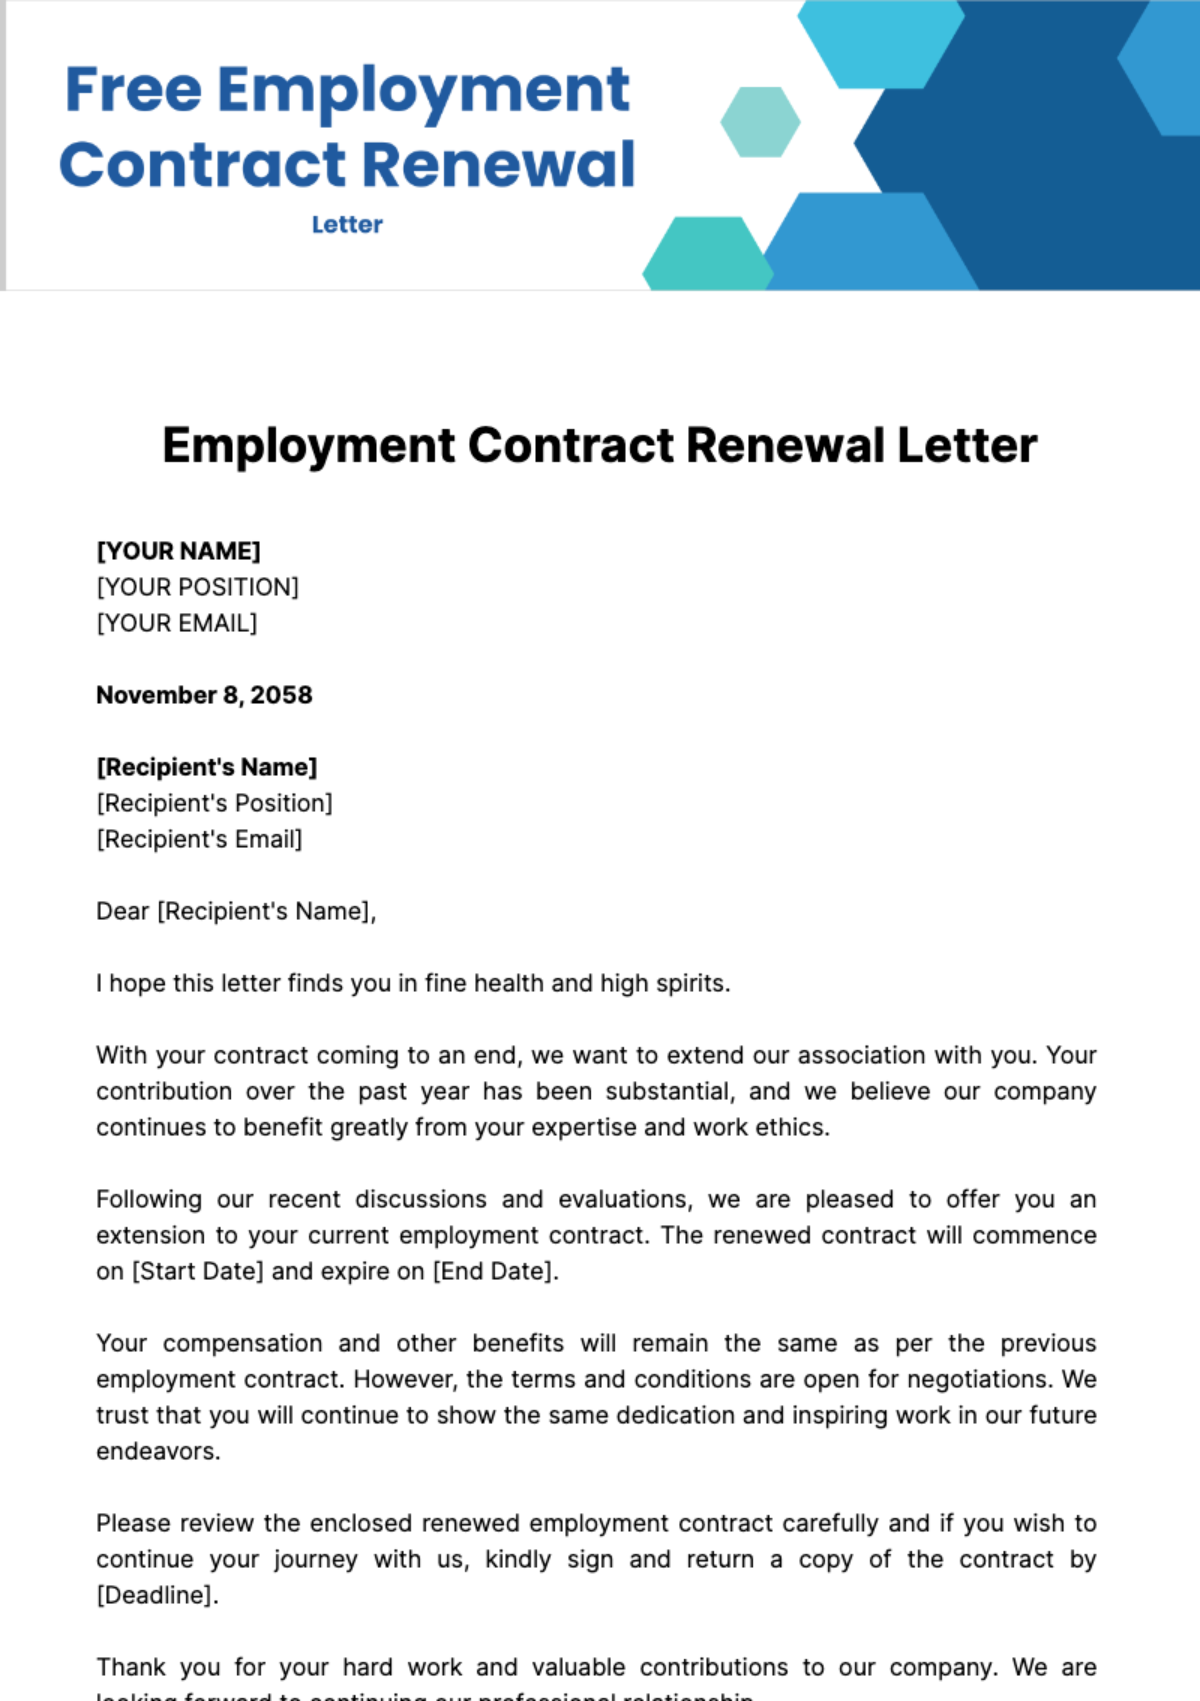 Free Employment Contract Renewal Letter Template